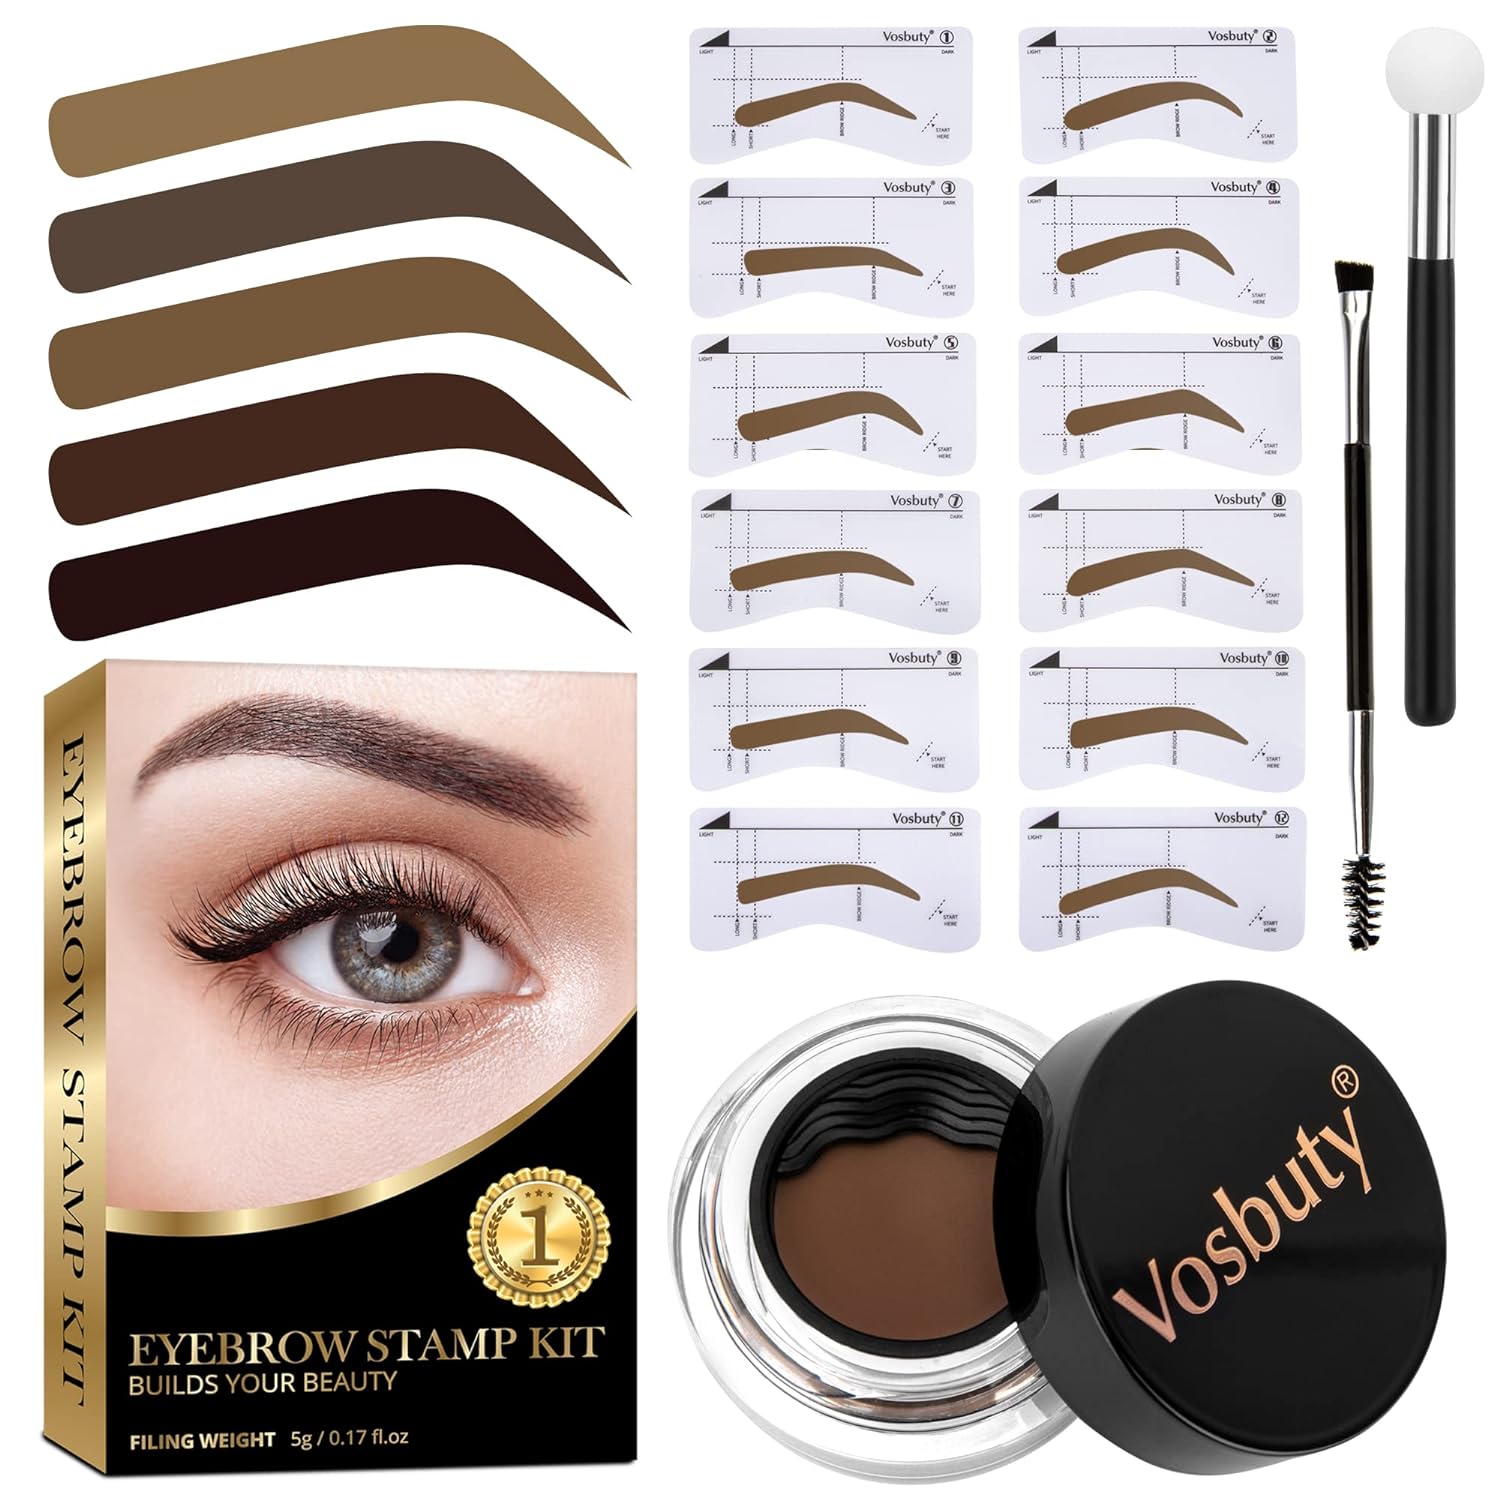 Eyebrow Stamp Stencil kit, Eyebrow Stamp for Perfect Brows, Brow Stamp Kit With 12 Classic Eyebrow Stencils, Eye Brow Stamping Kit, Long-Lasting Waterproof Smudge-Proof, Eyebrow Color Stamp Kit (Light Brown)